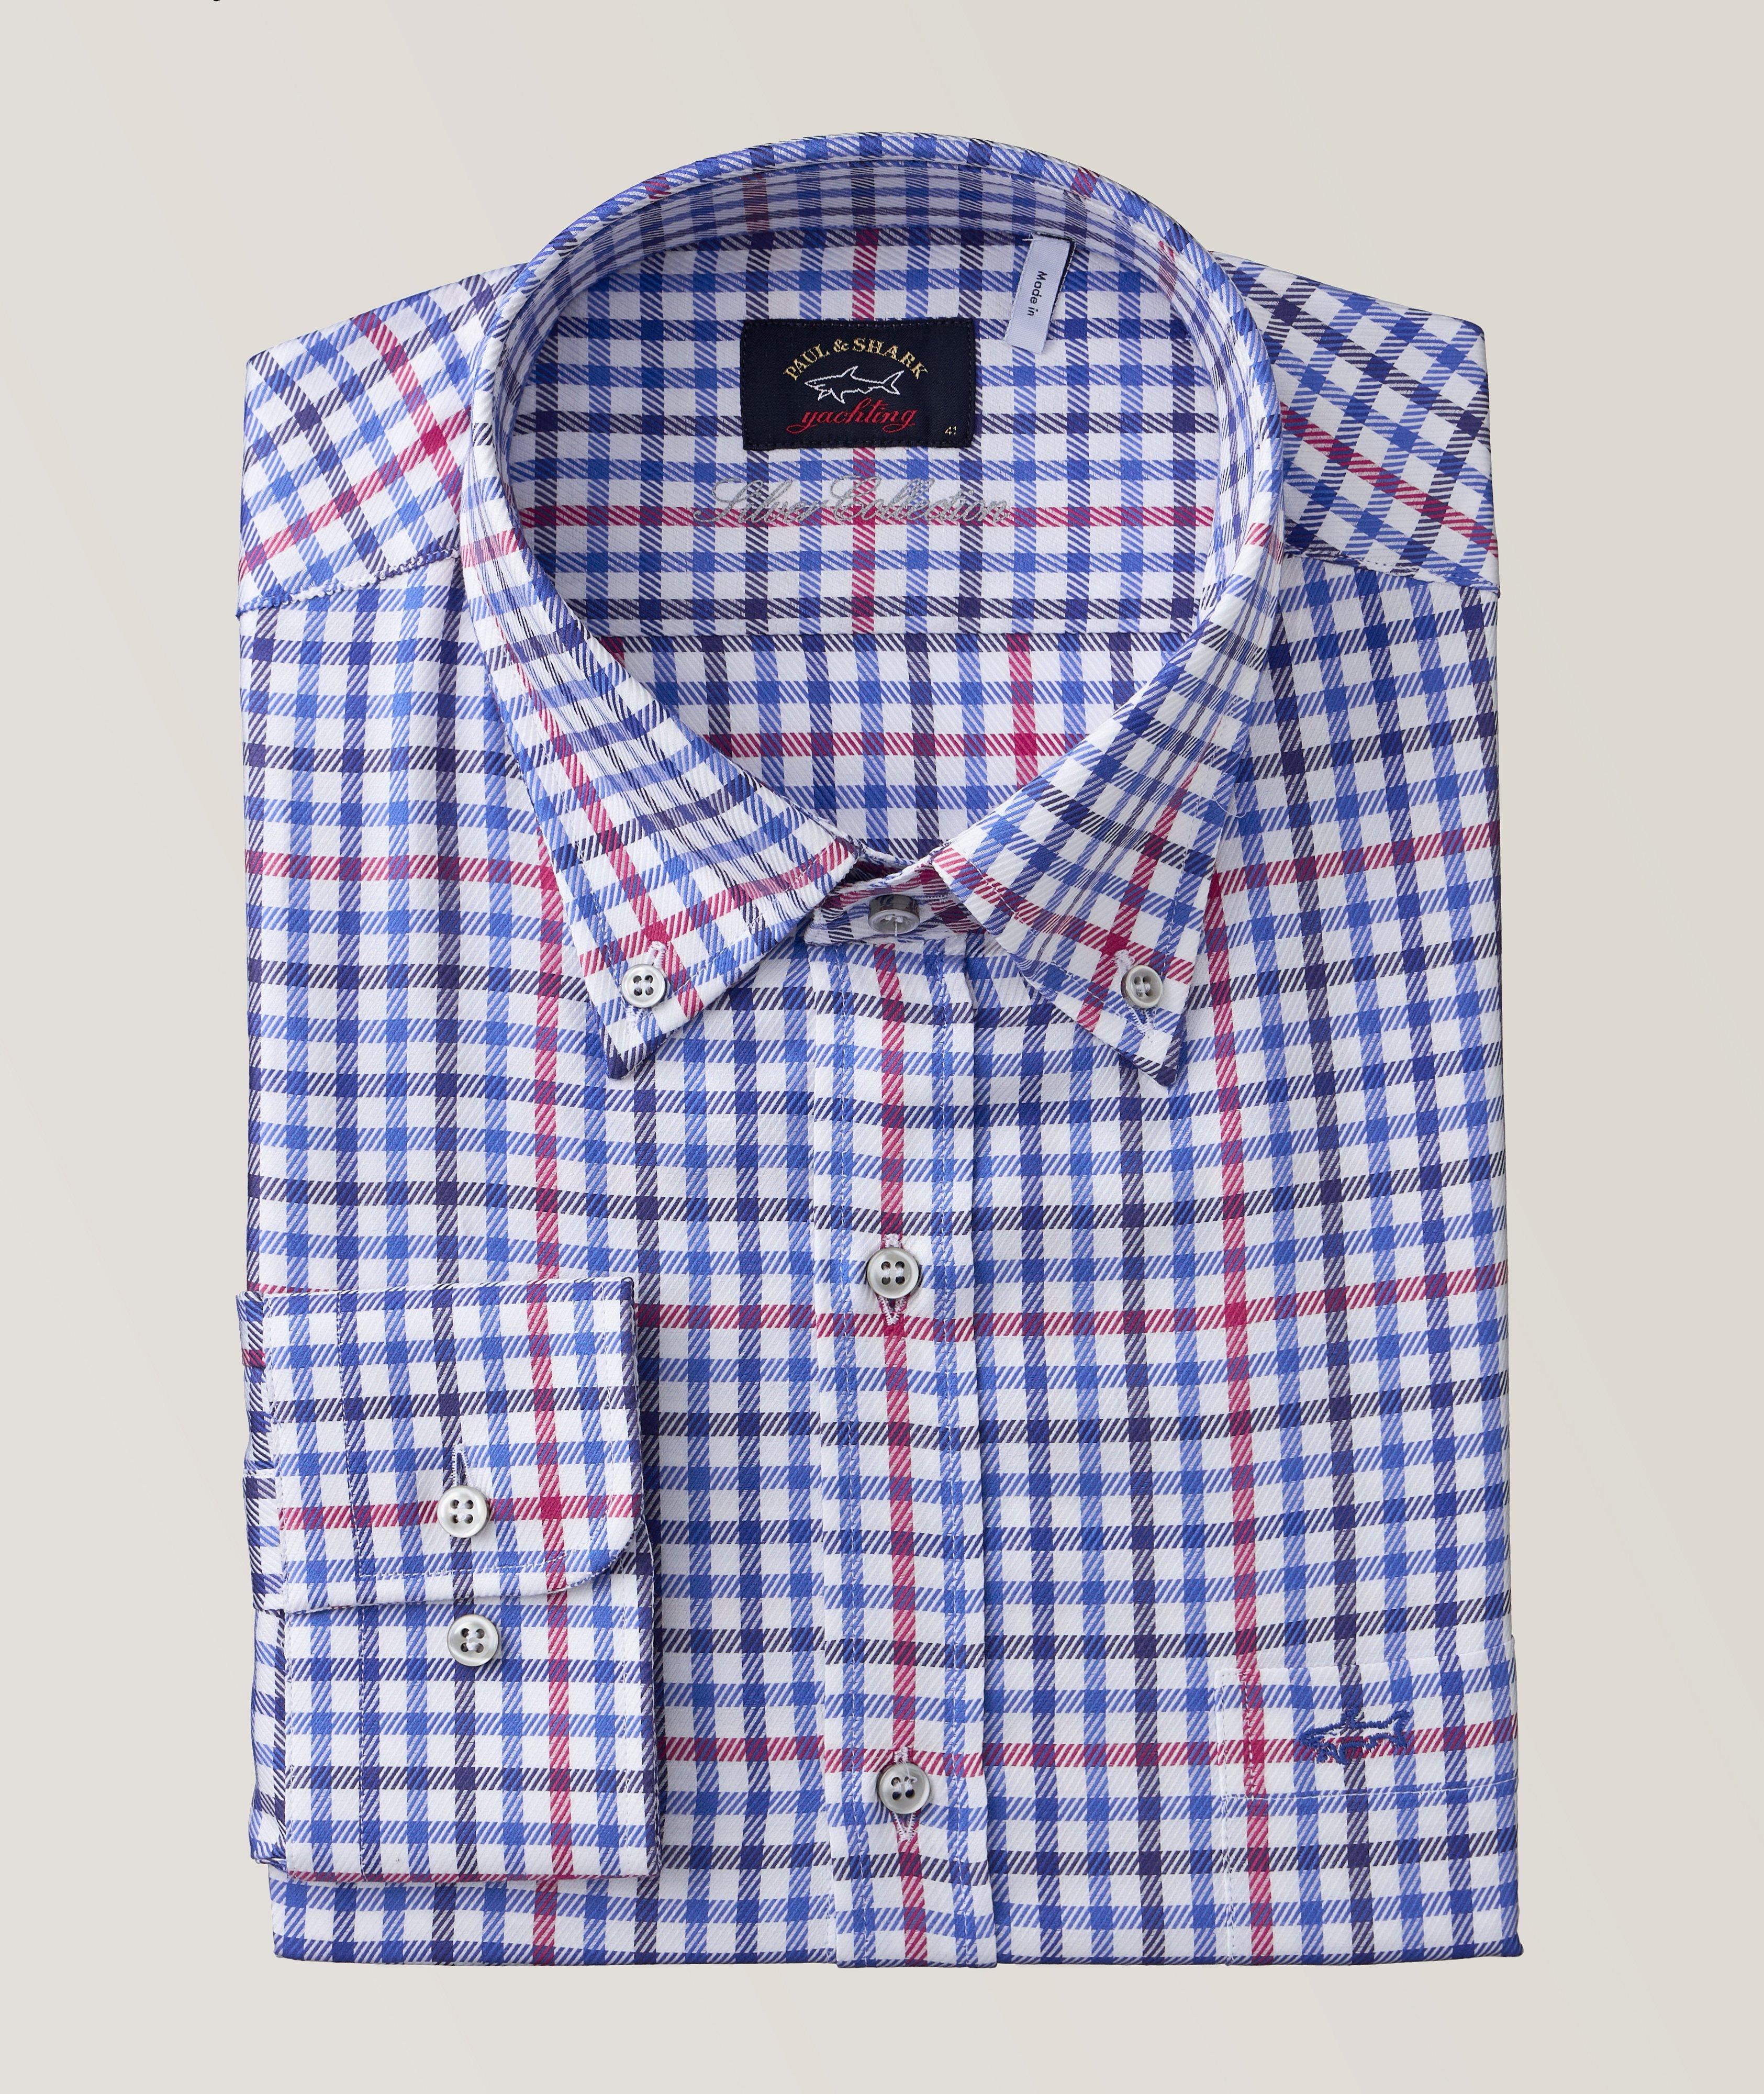 Silver Collection Checkered Cotton Sport Shirt image 0